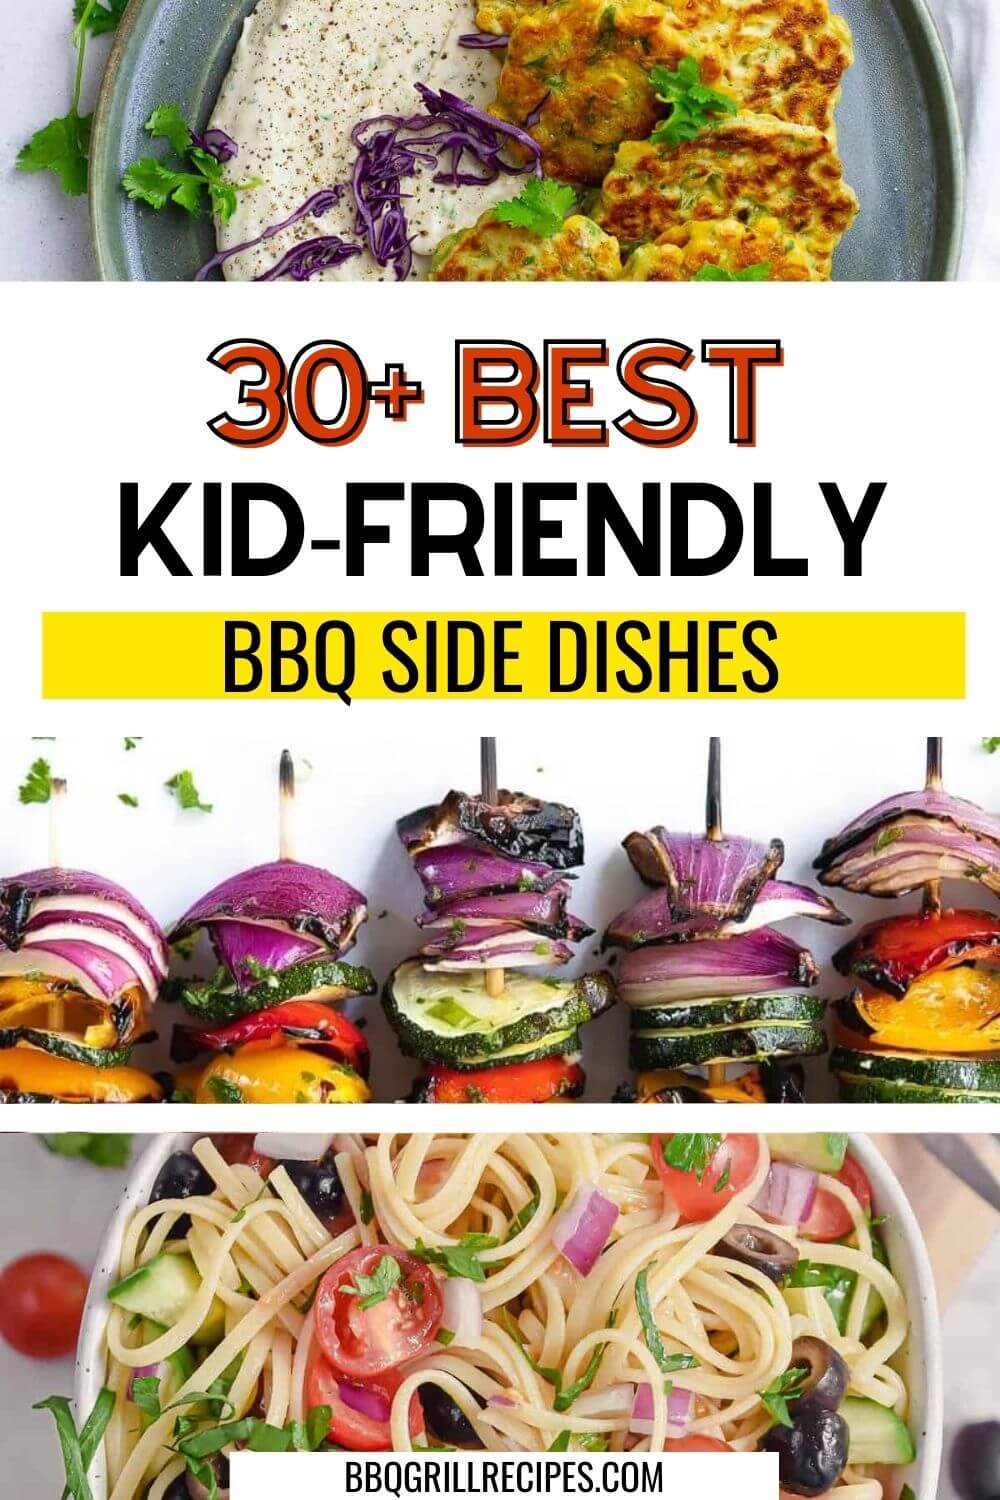 the best kid-friendly BBQ side dishes